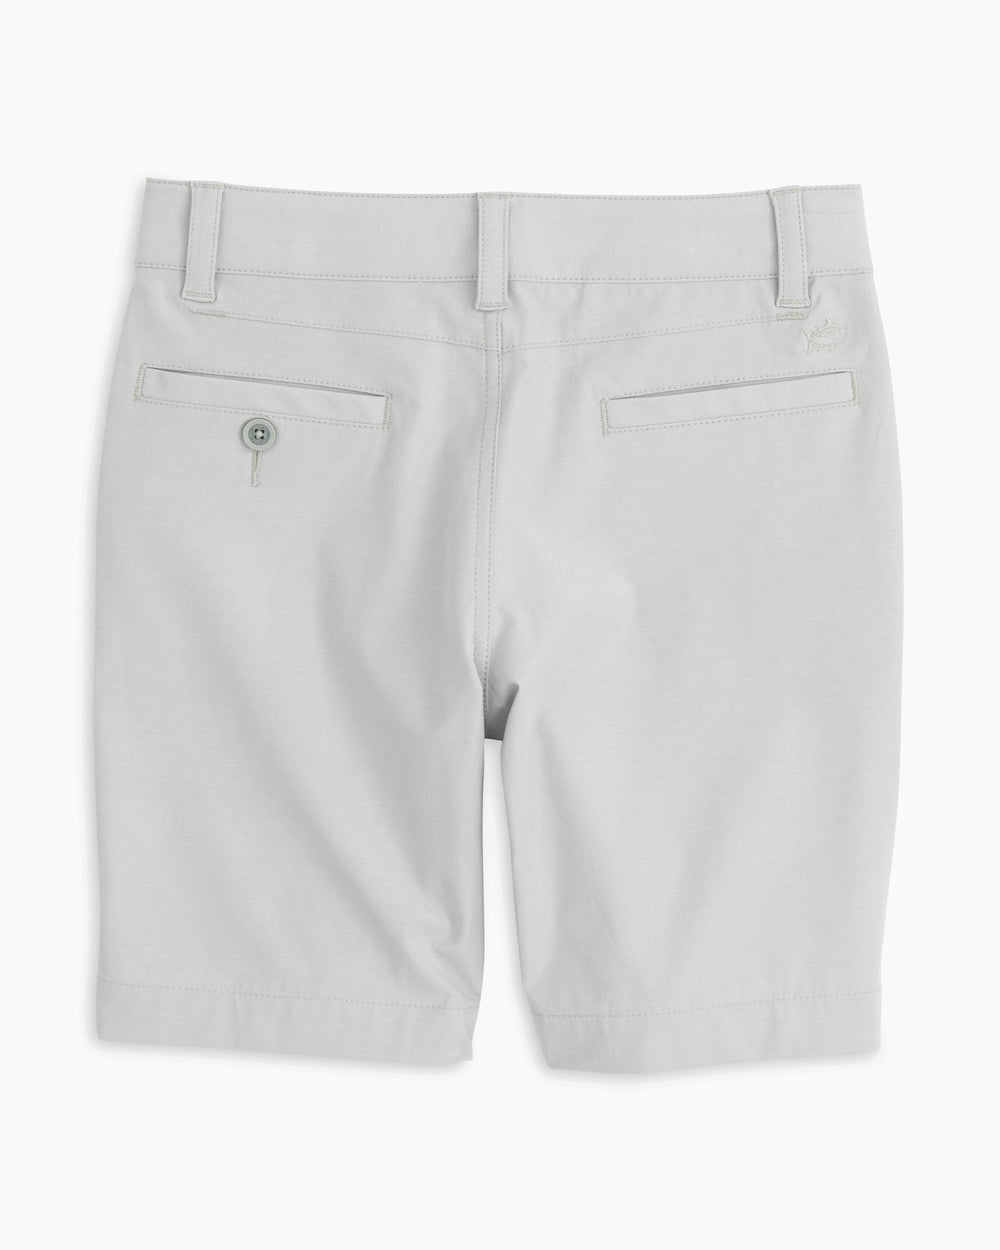 The back view of the Kid's Grey T3 Gulf Short by Southern Tide - Seagull Grey